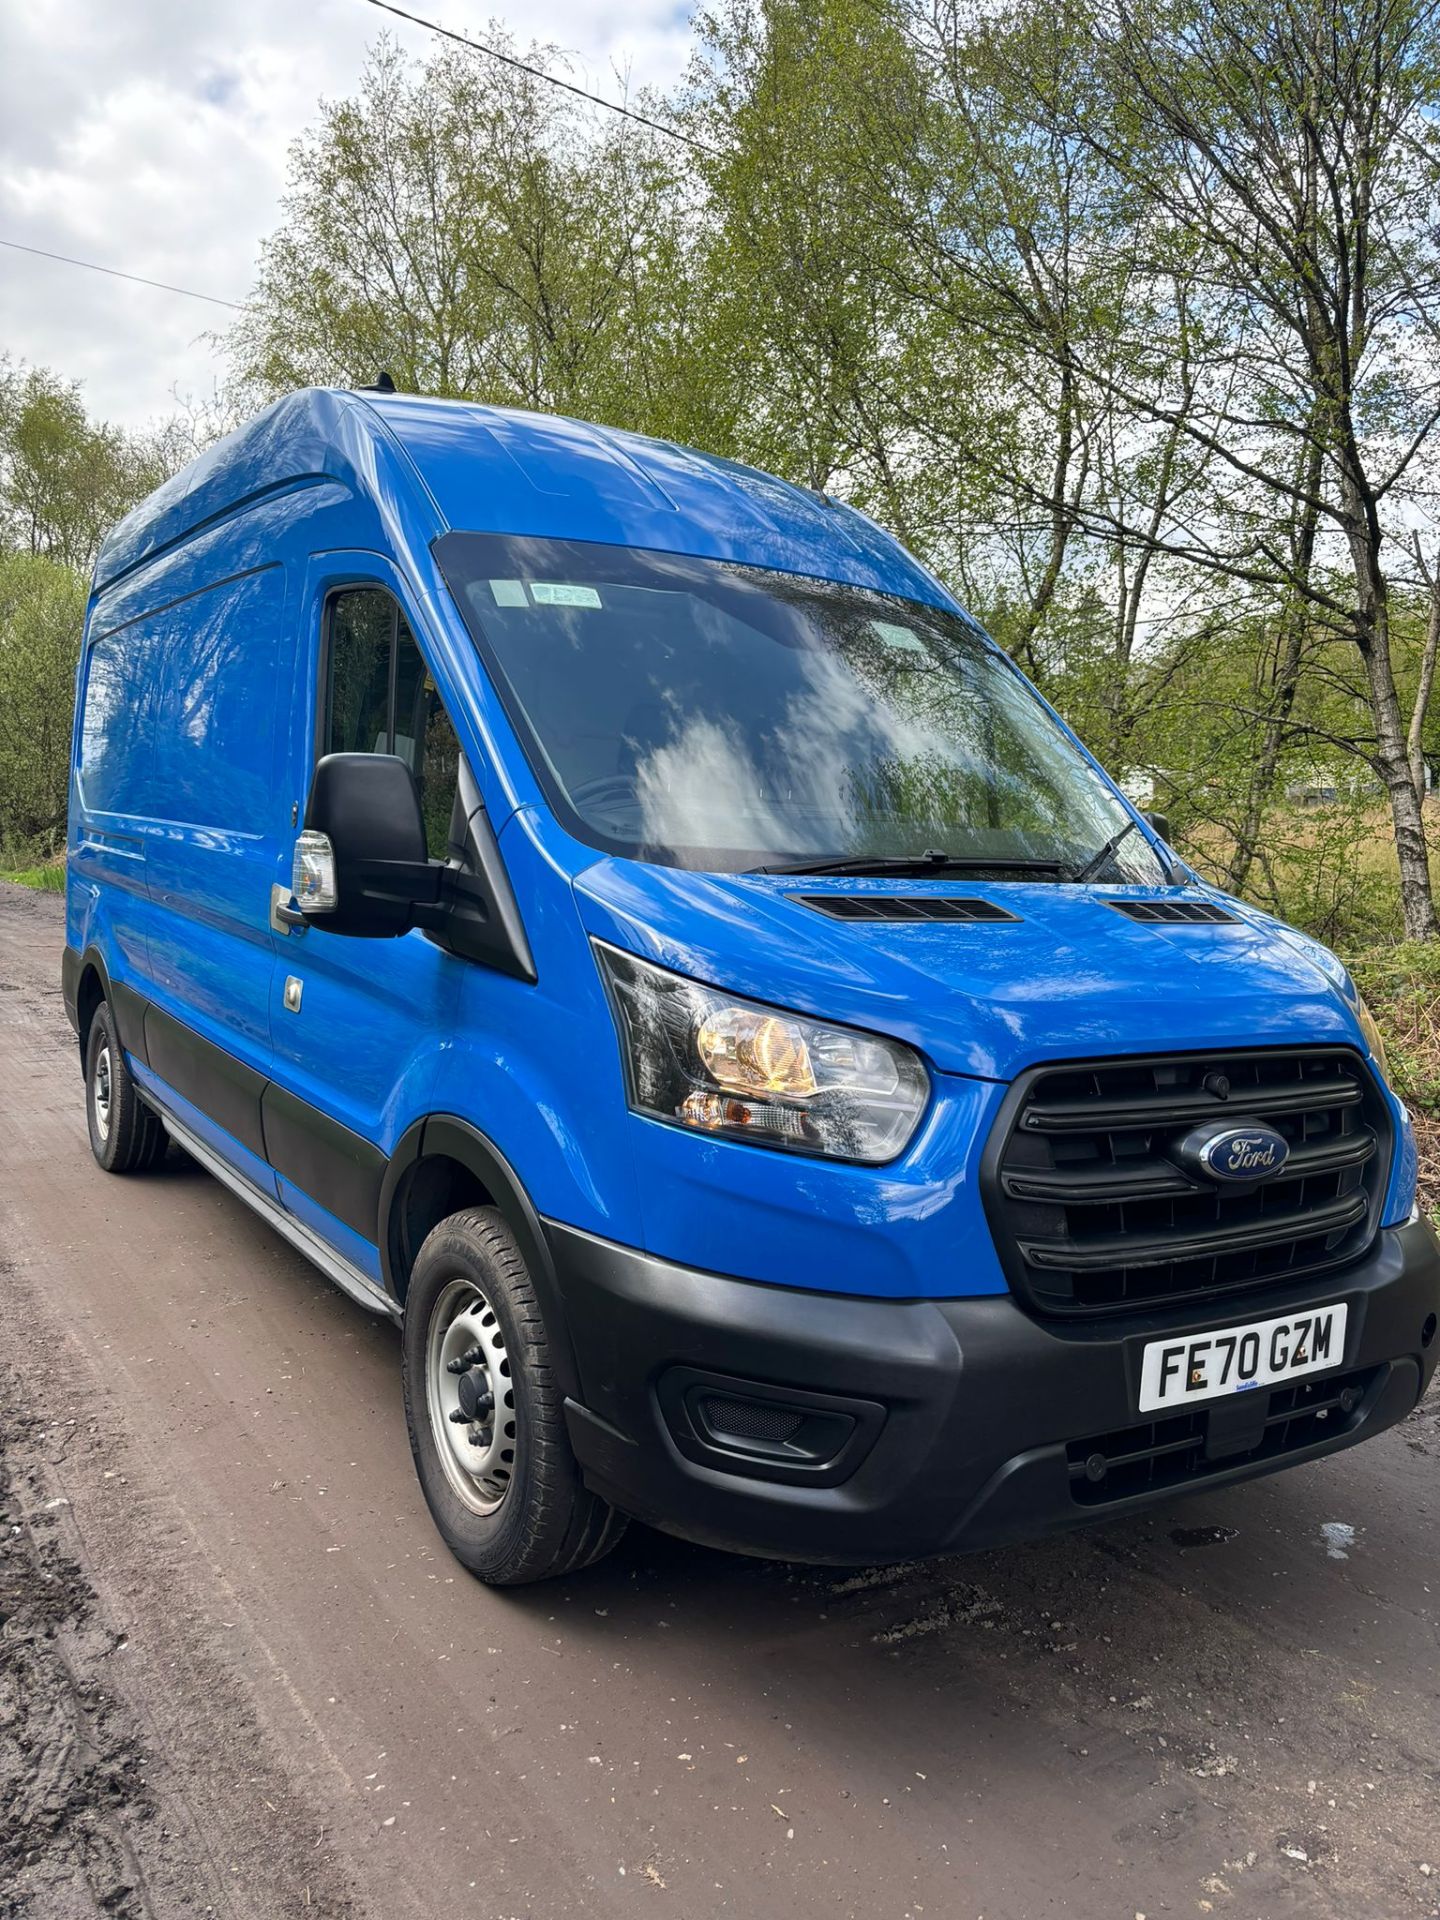 2021 FORD TRANSIT T350 PANEL VAN - LOW MILEAGE, IMMACULATE CONDITION! - Image 13 of 13